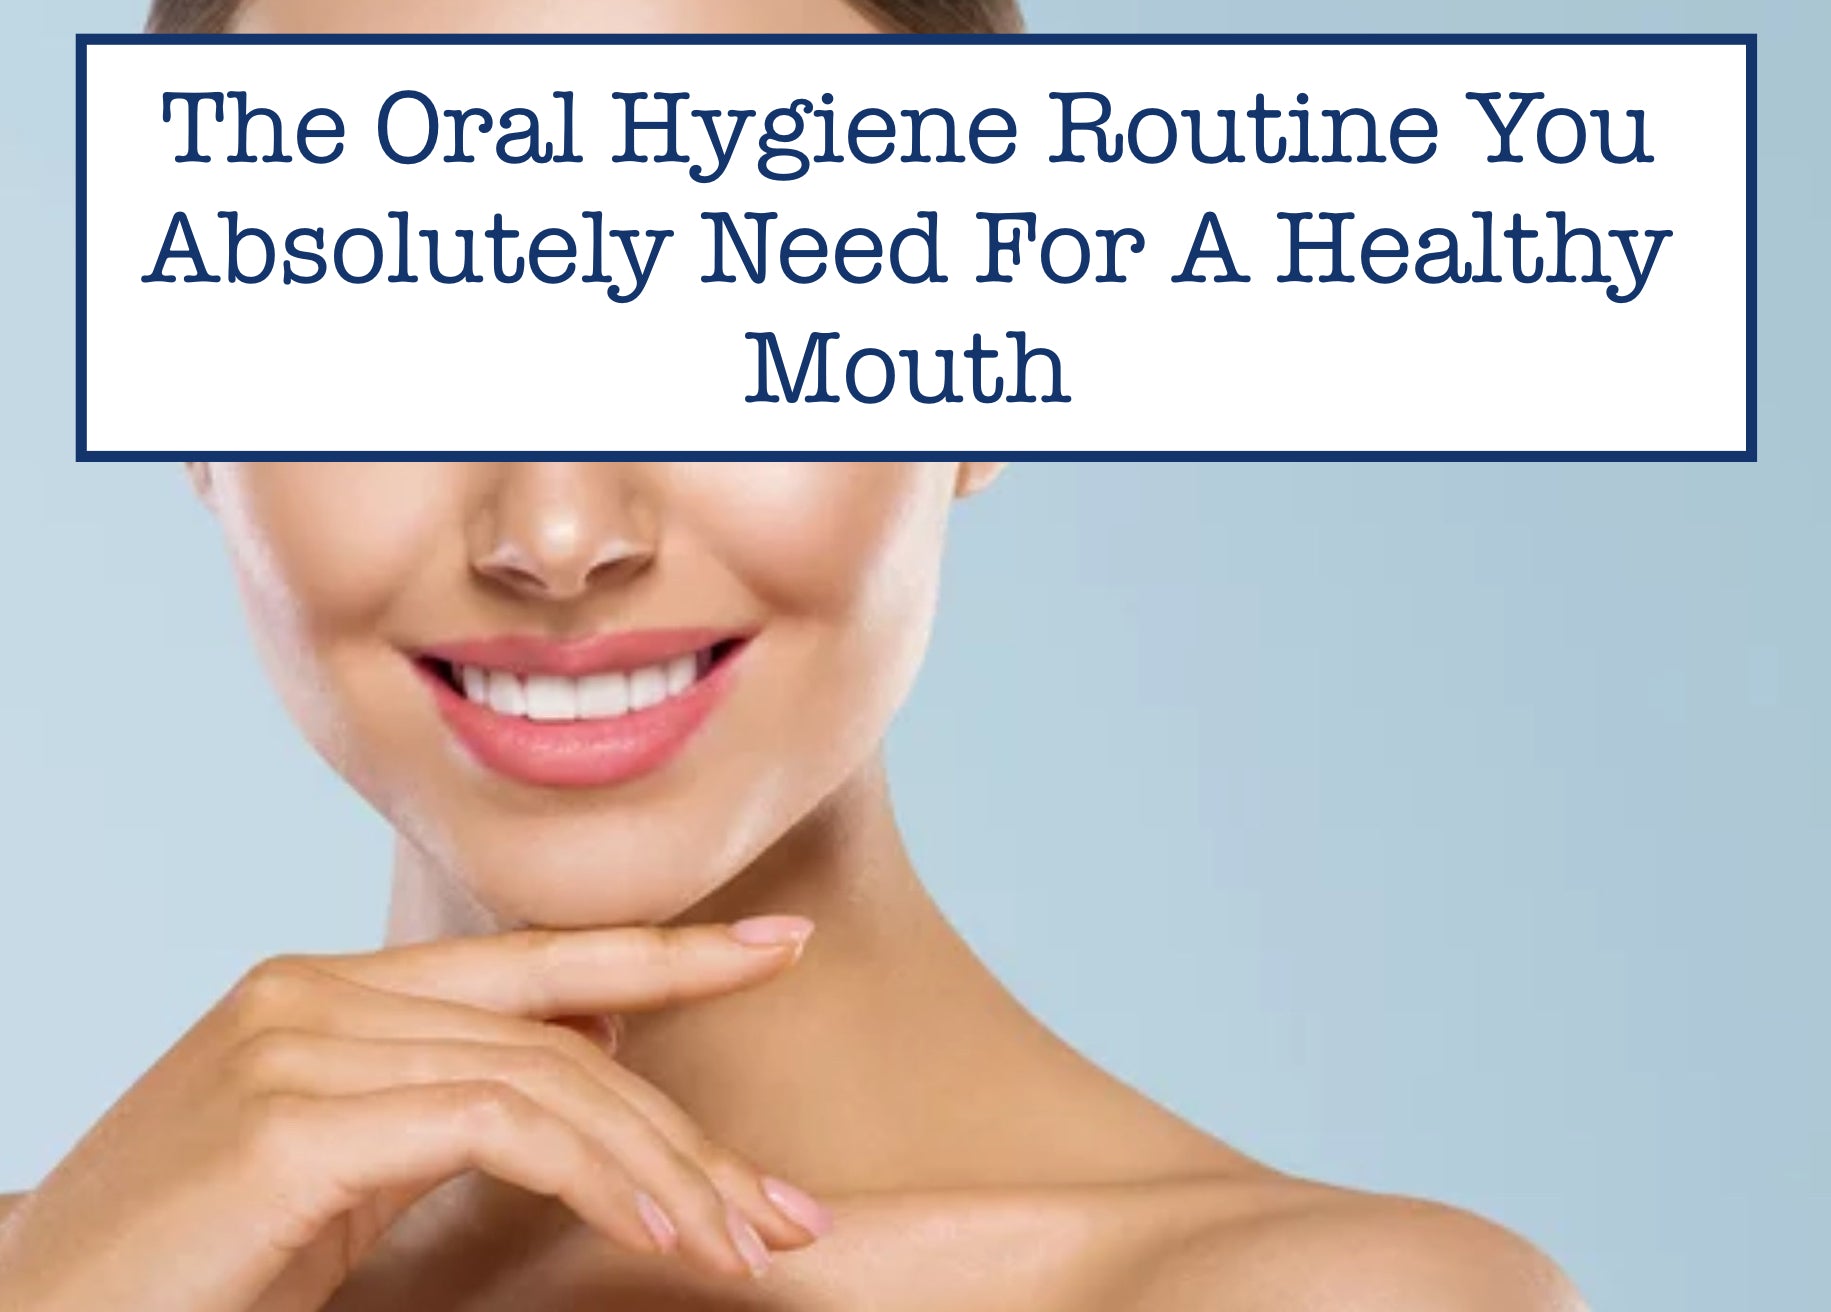 The Oral Hygiene Routine You Absolutely Need For A Healthy Mouth